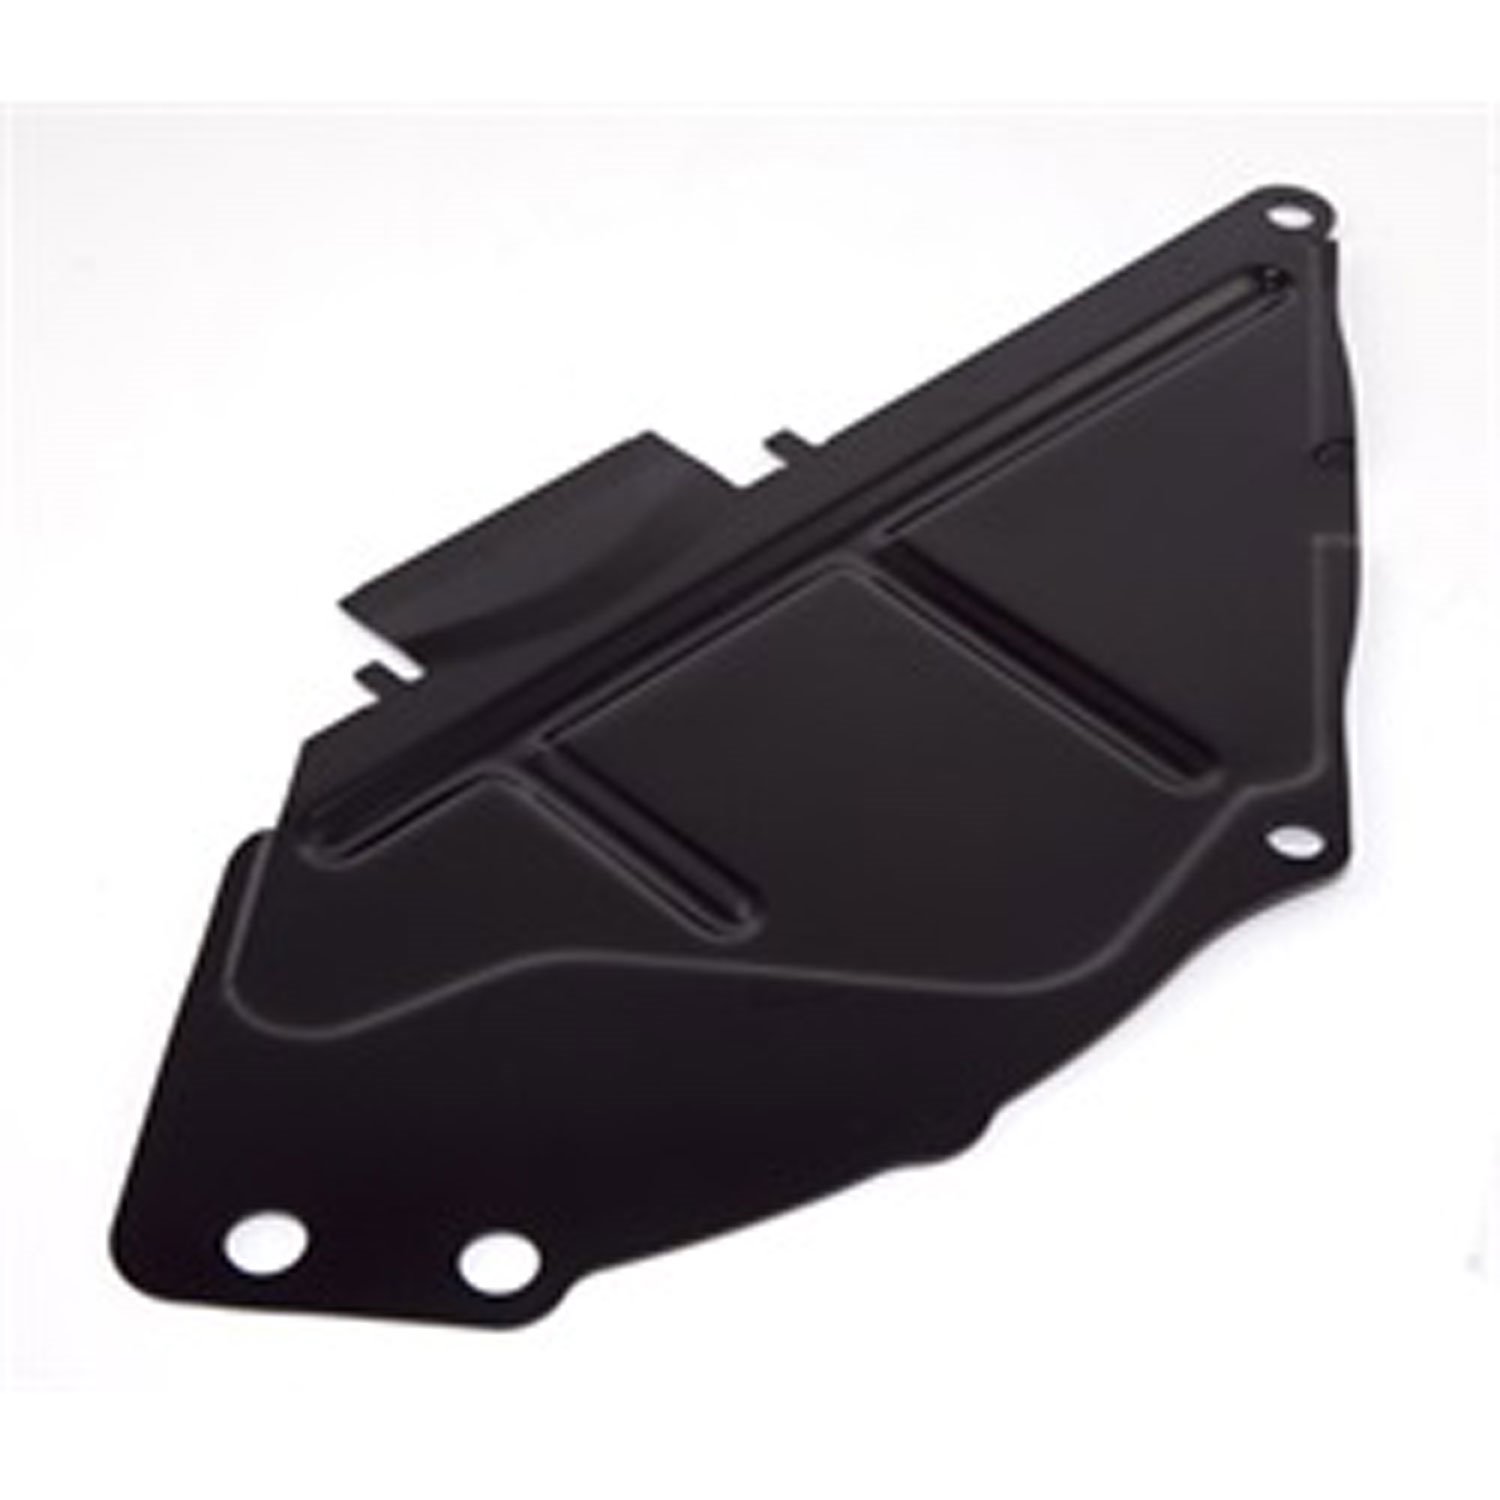 Bellhousing Inspection Cover Plate 1972-1986 Jeep CJ By Omix-ADA